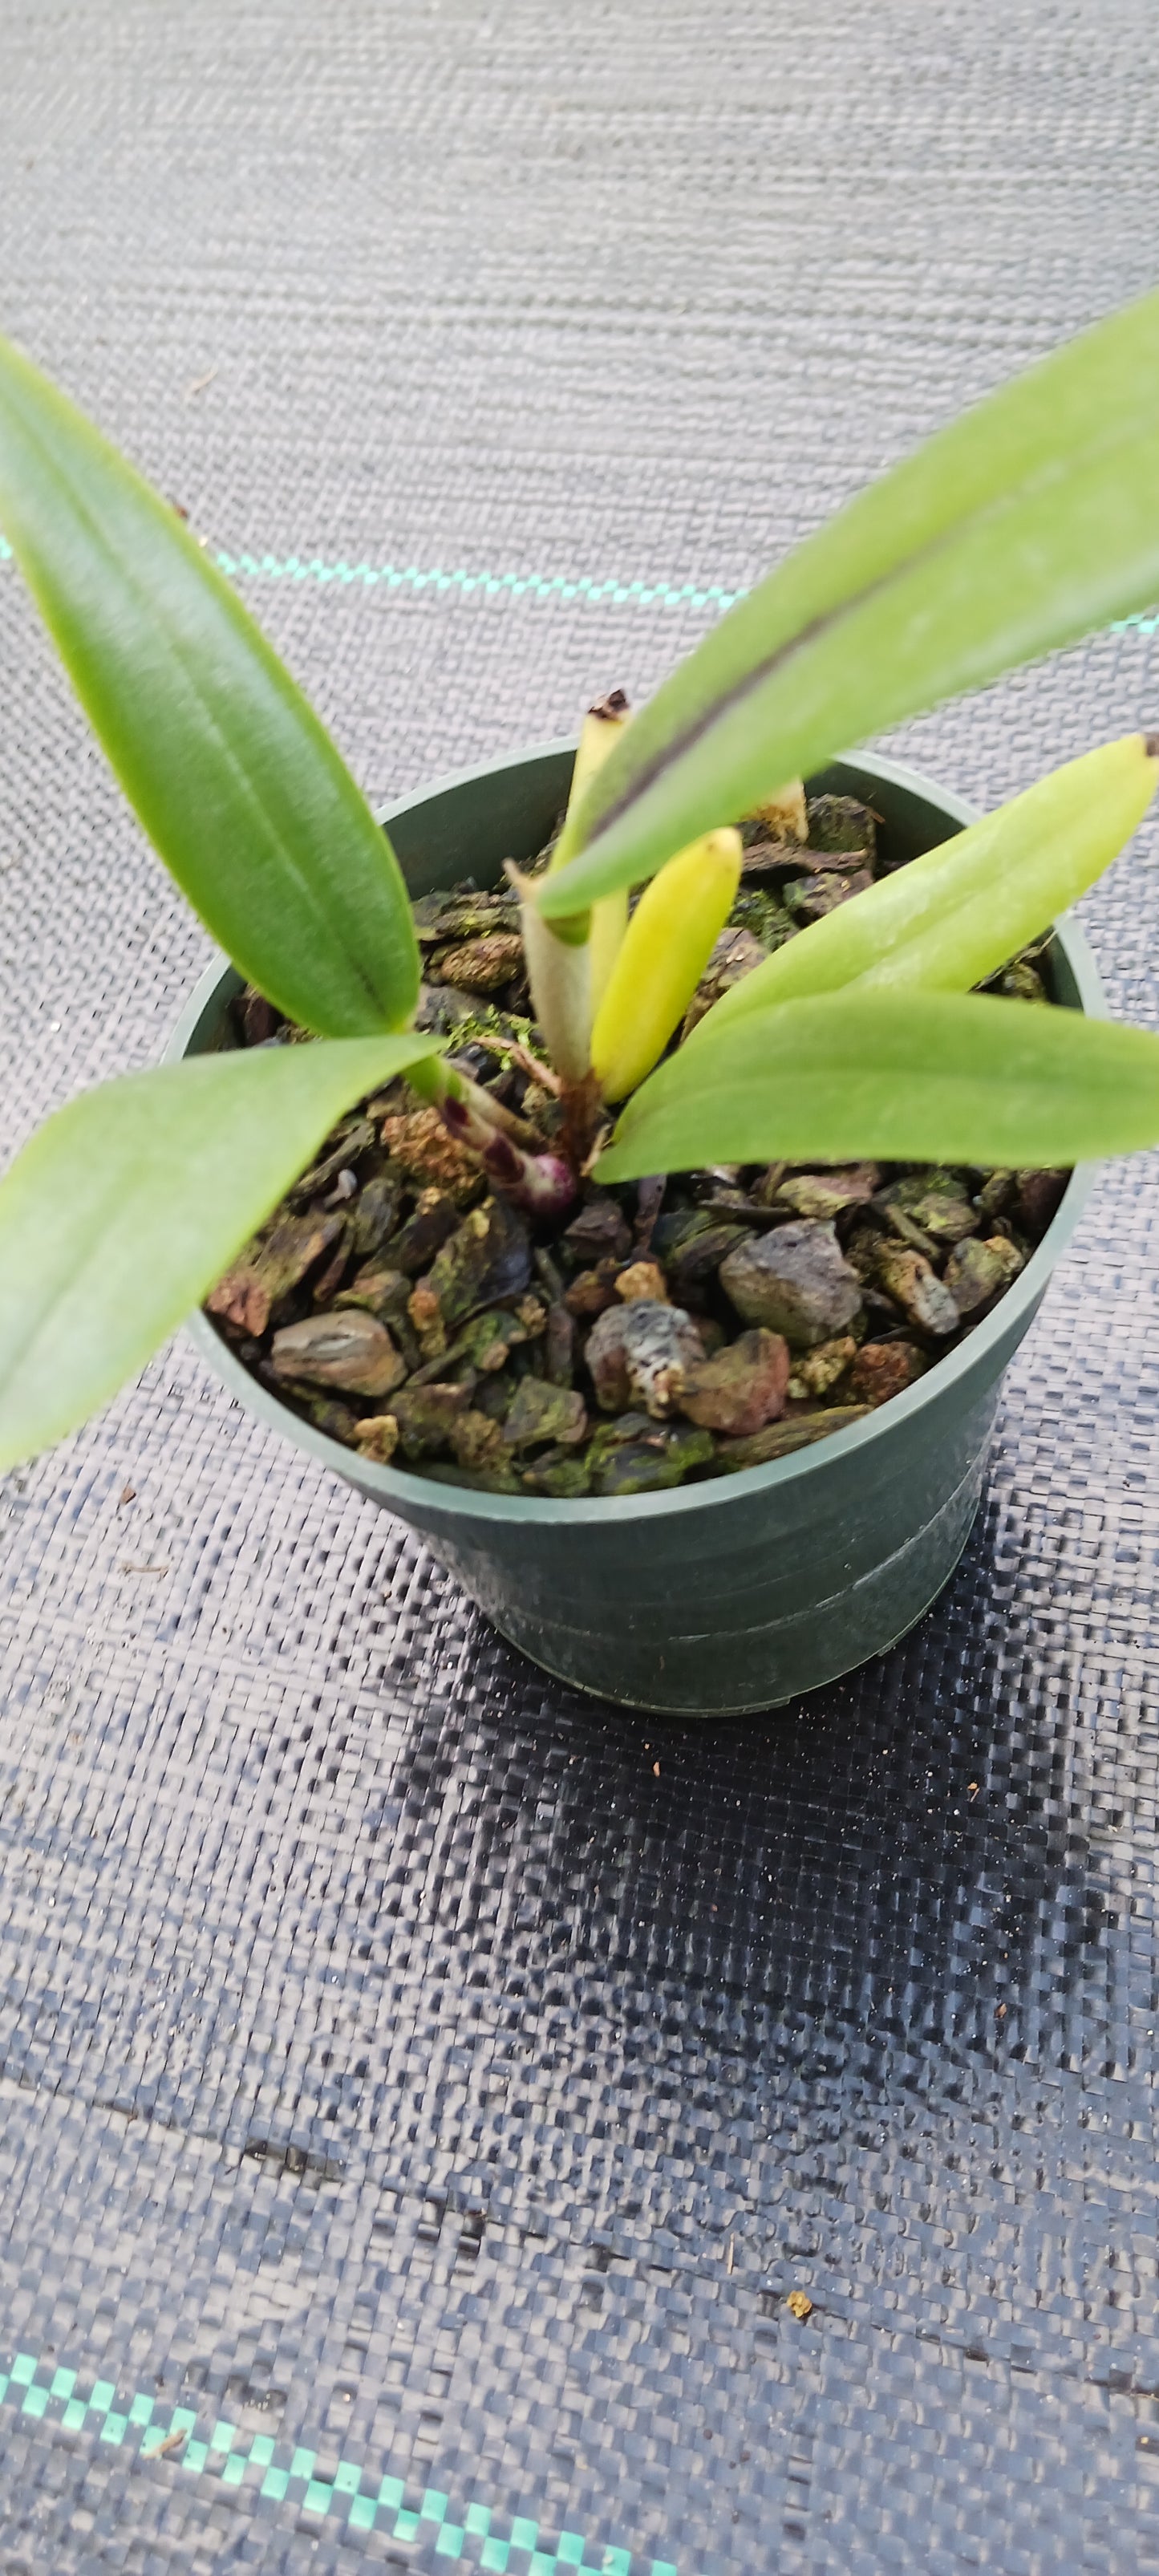 Orchid Cattleya Alliance Lost Tag Two bare root plants